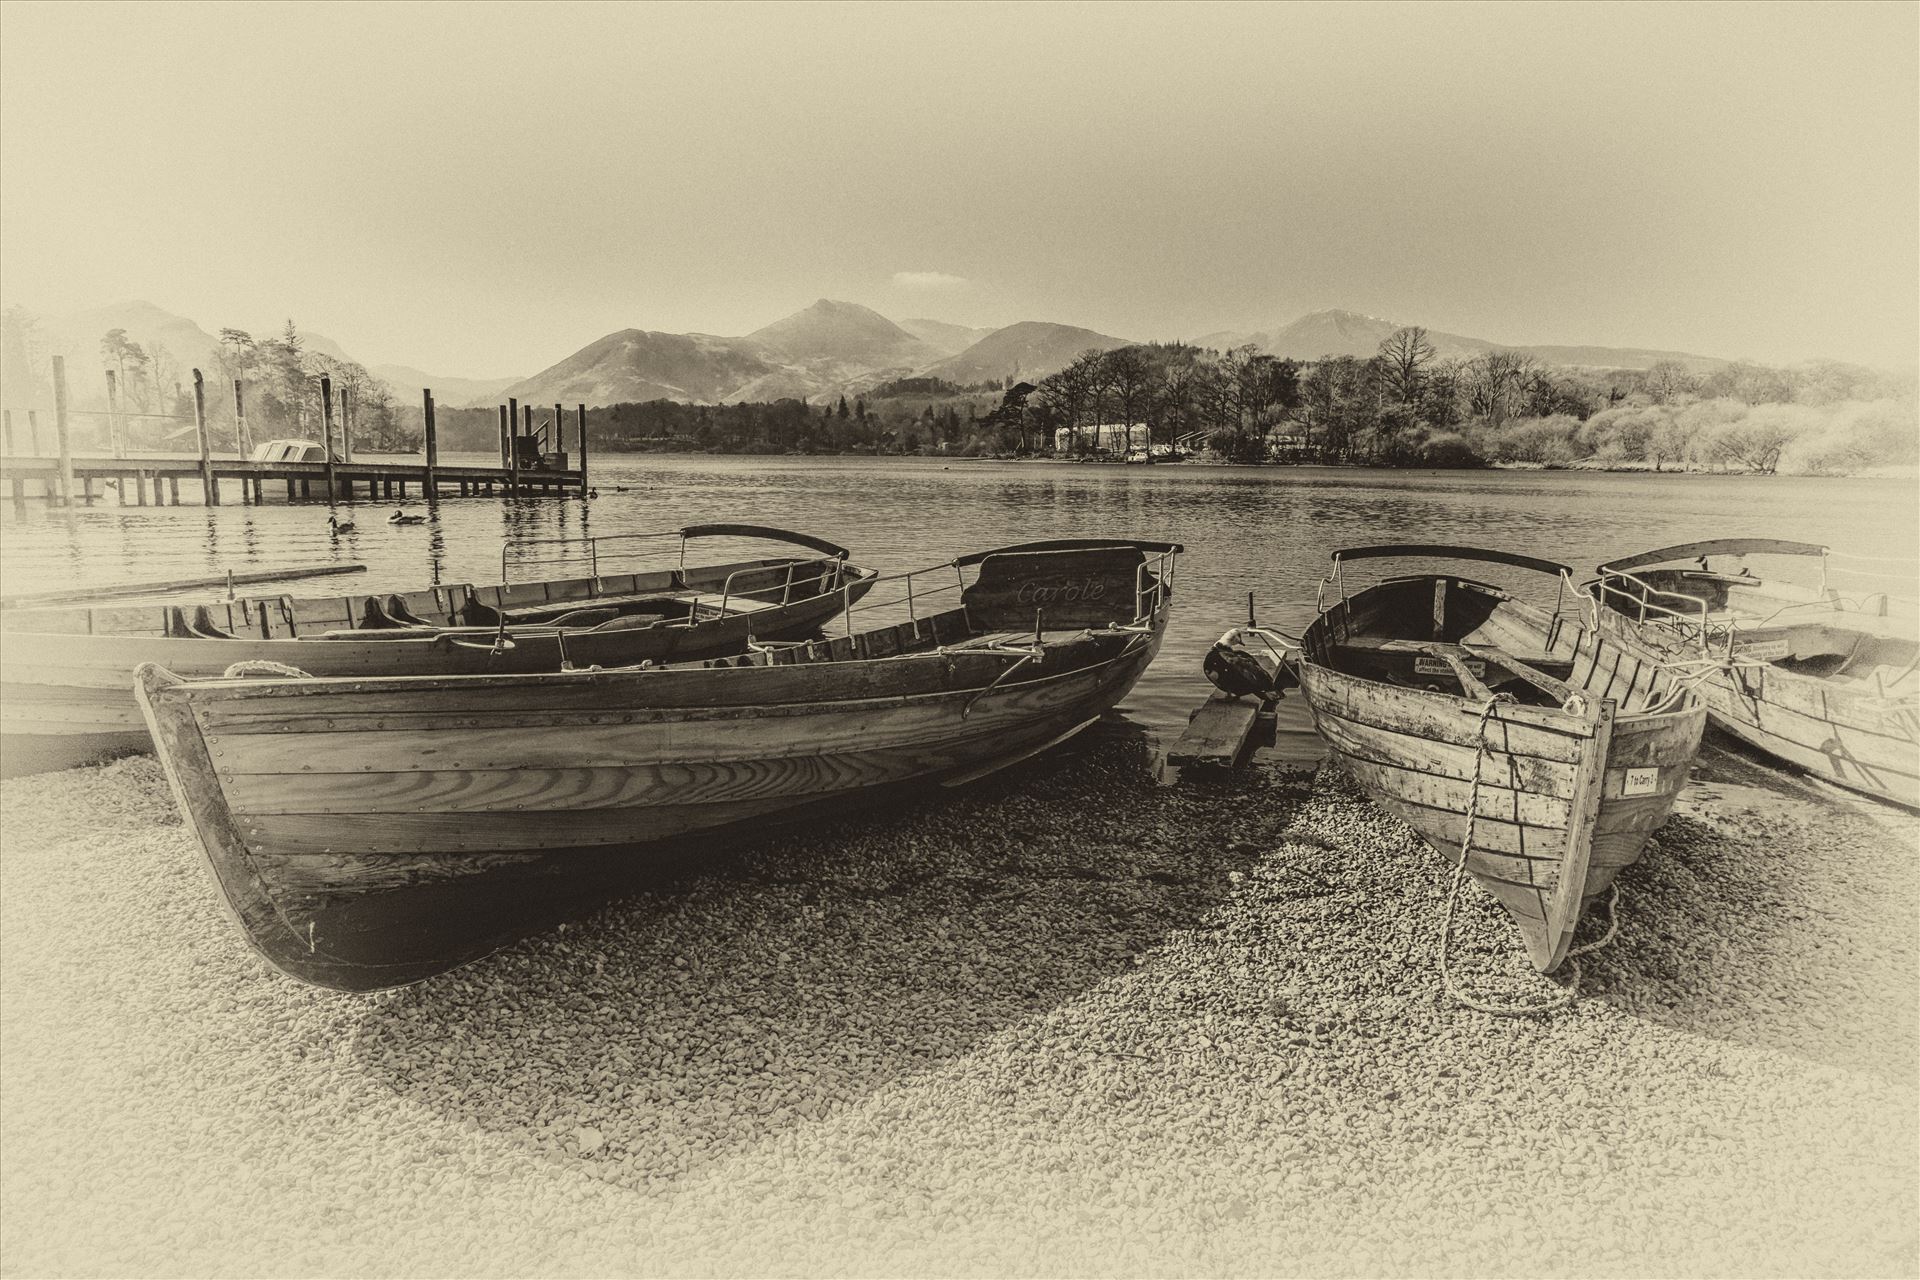 Rowing boats at Derwentwater -  by philreay